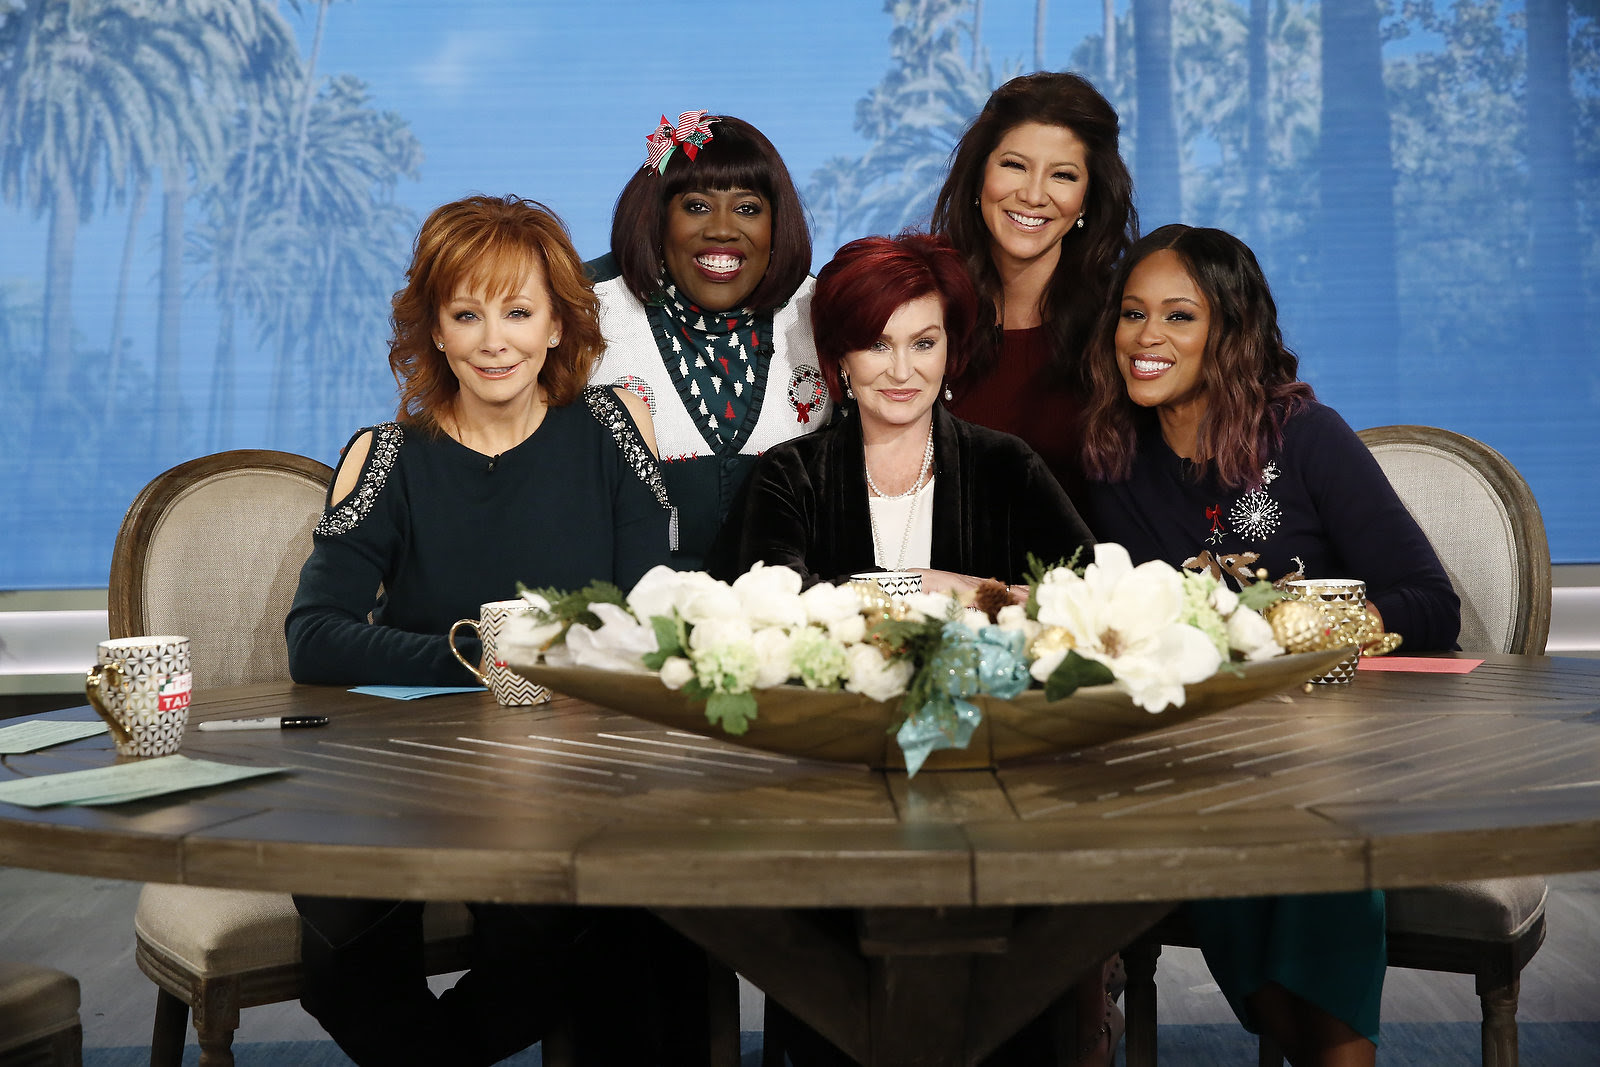 Reba McEntire Dishes on Christmas & GRAMMY Nods While Co-Hosting “The Talk”